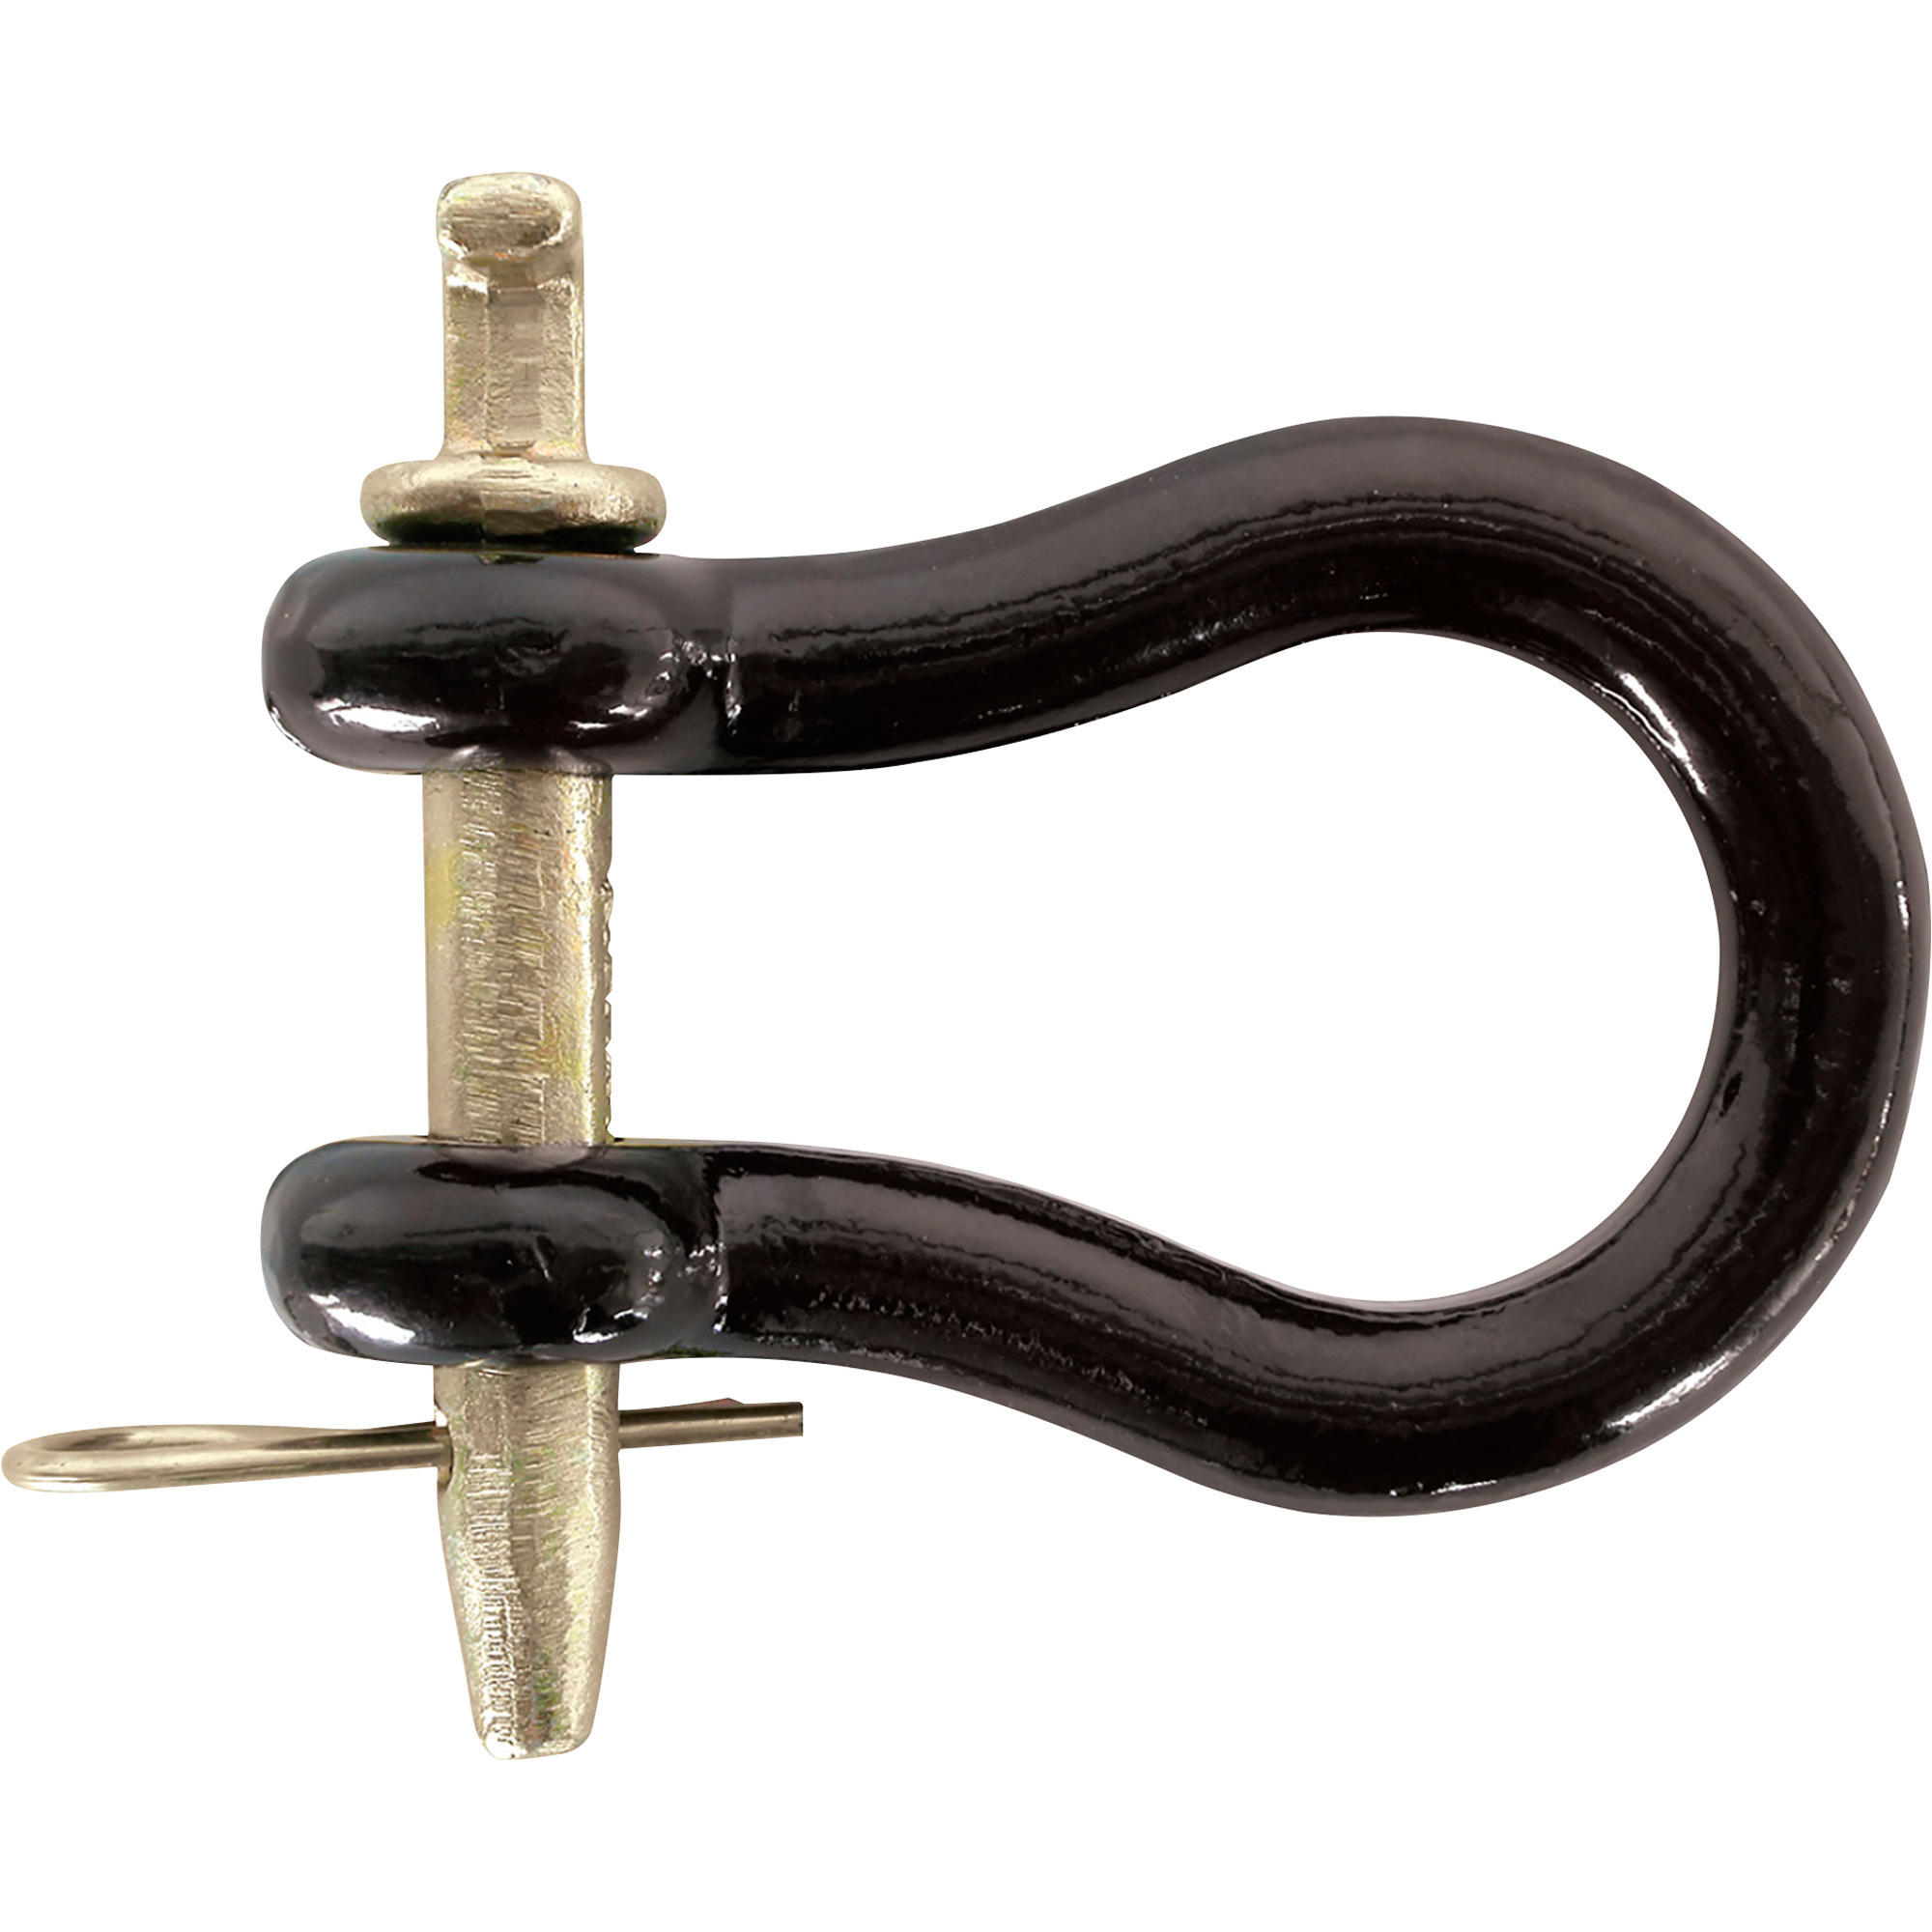 Braber Equipment Straight Clevis, 7/8Inch x 4 1/4Inch, Model 64.300.078